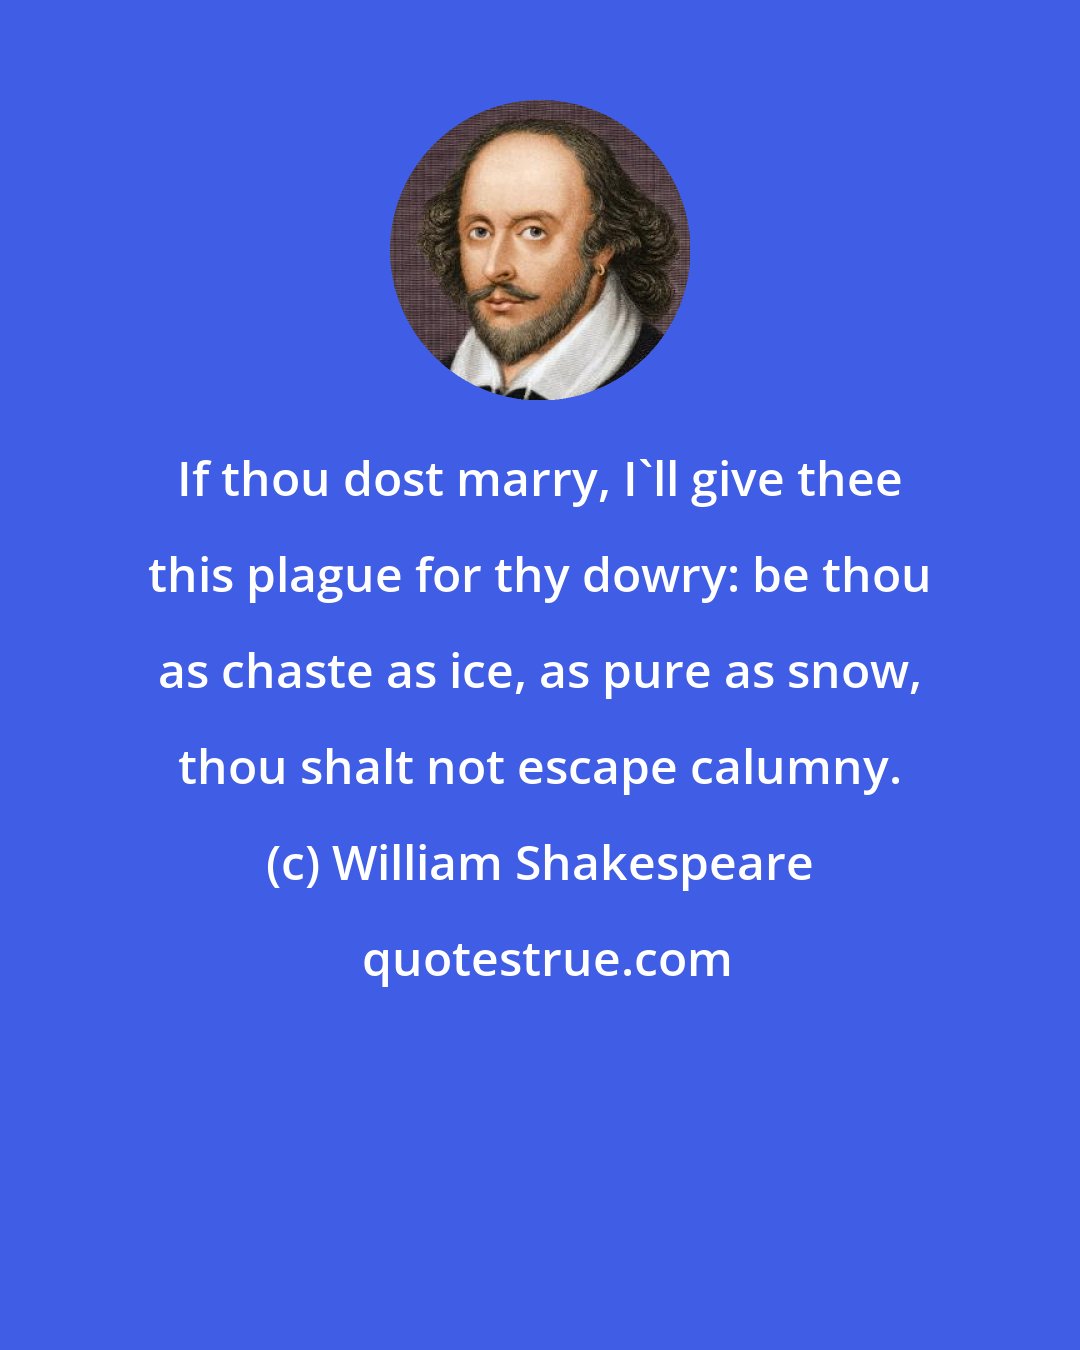 William Shakespeare: If thou dost marry, I'll give thee this plague for thy dowry: be thou as chaste as ice, as pure as snow, thou shalt not escape calumny.